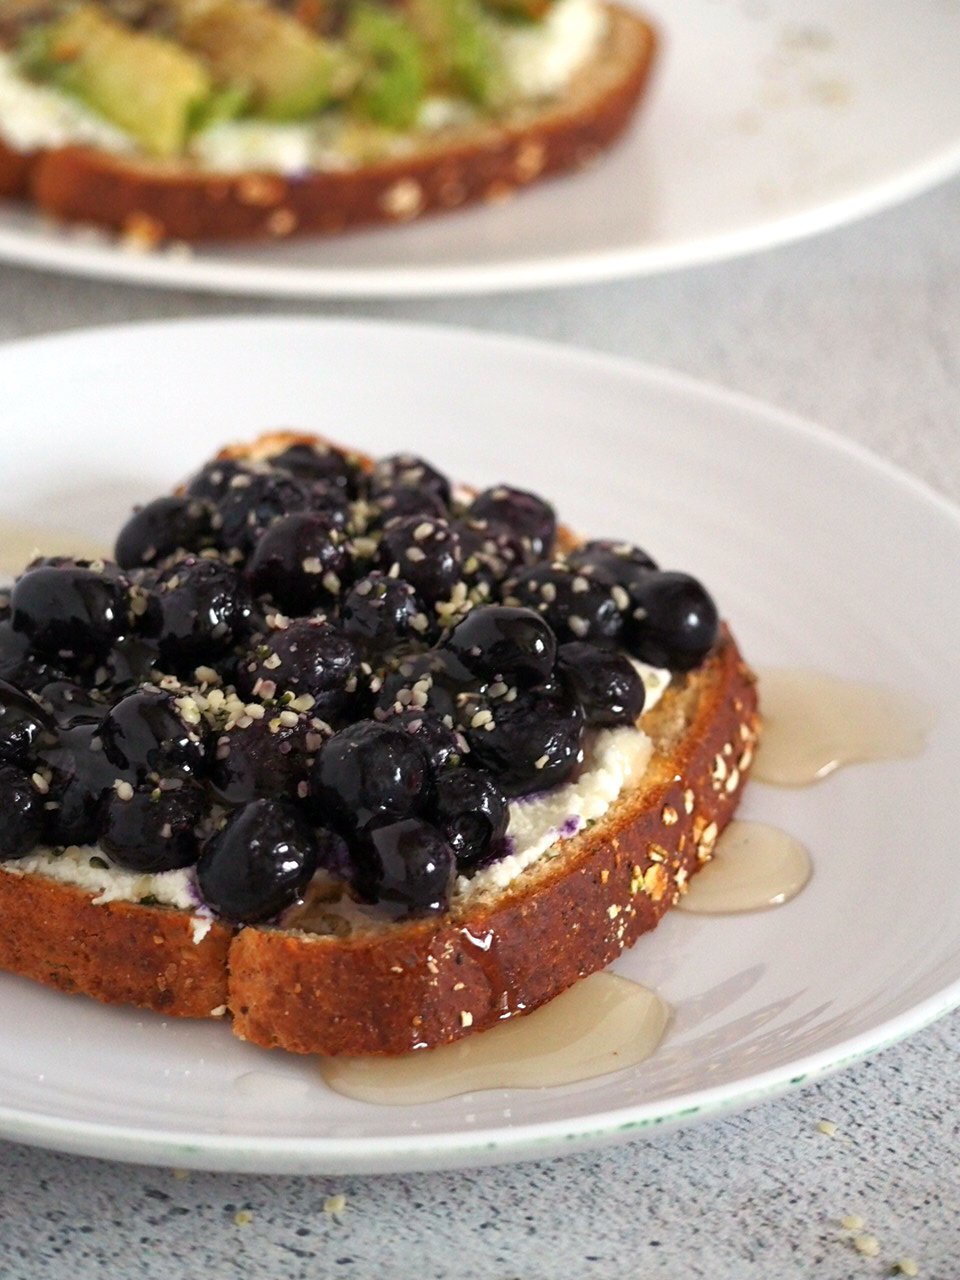 Blueberry breakfast toast on a plate, dripping with honey on the side.